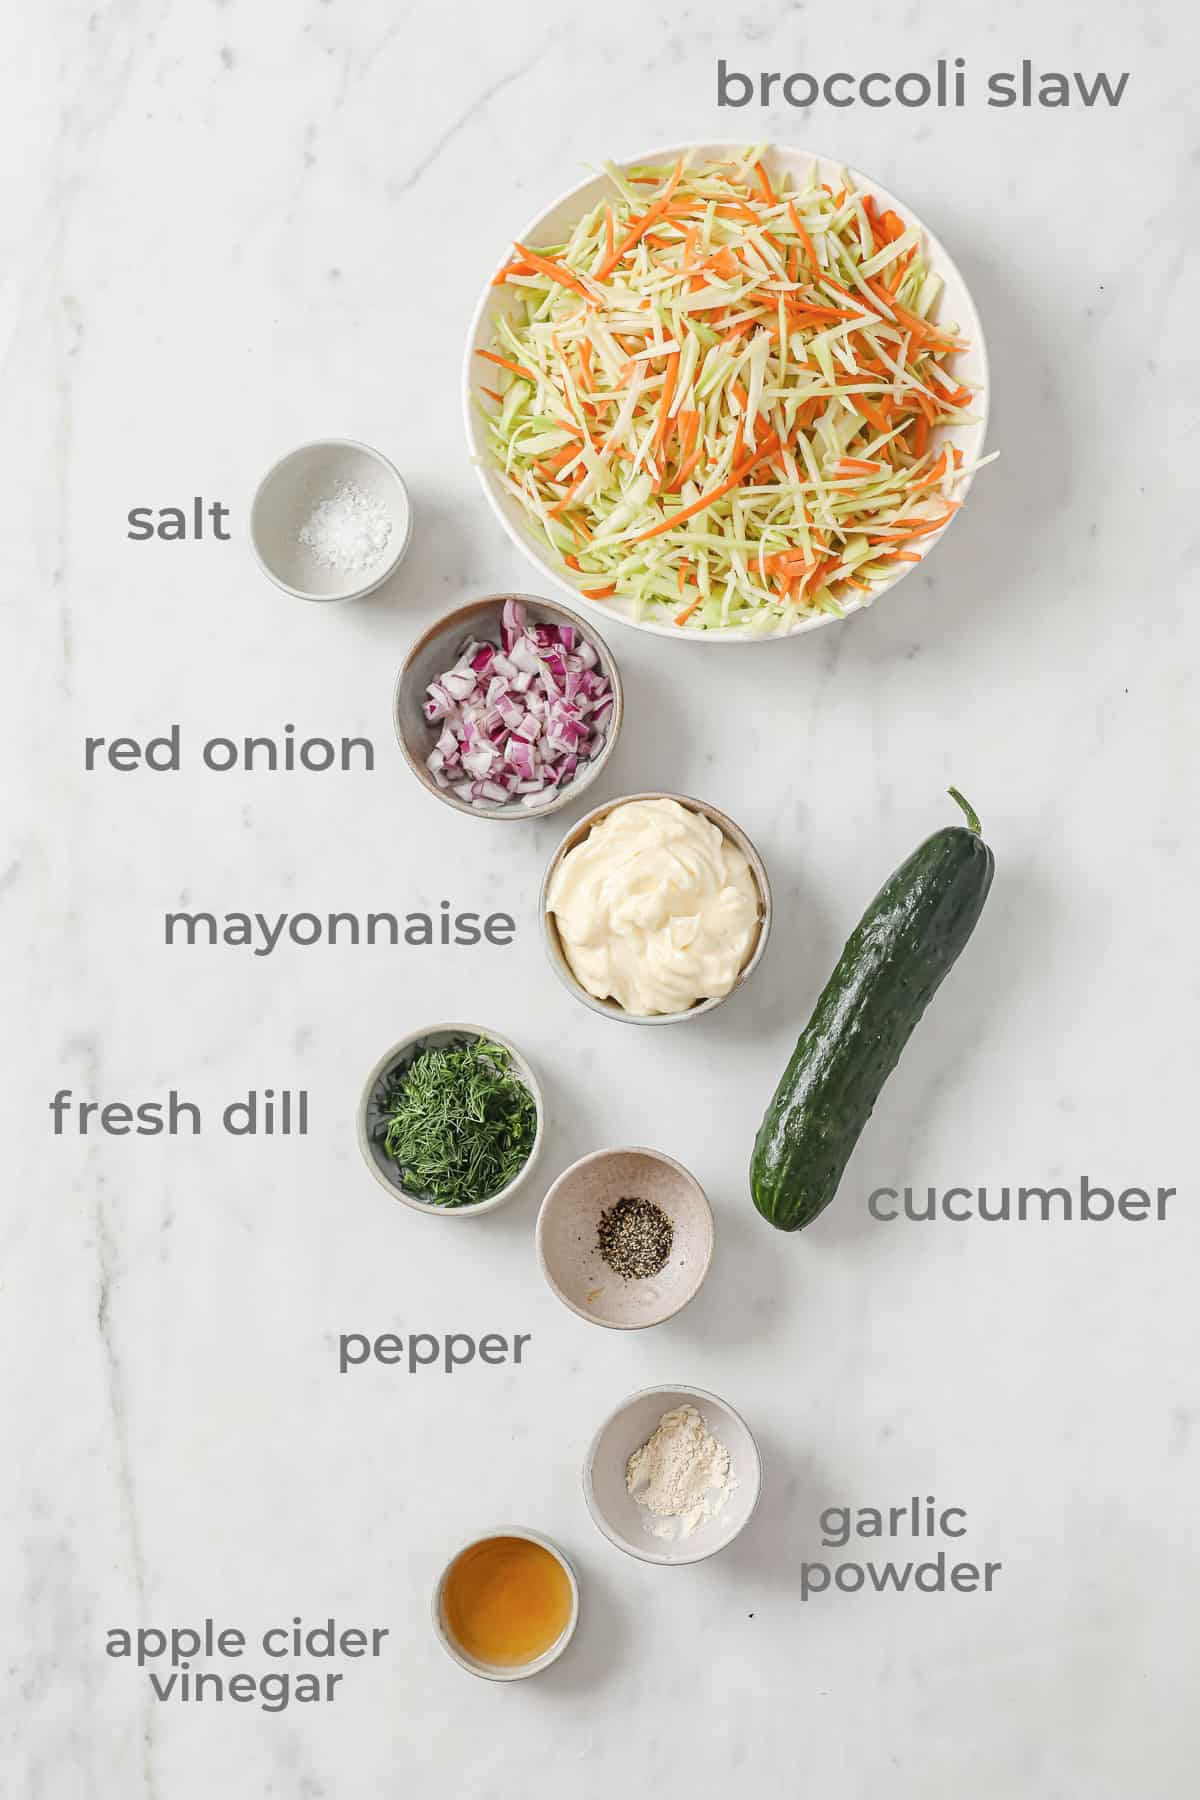 Ingredients for keto coleslaw in a mixing bowl - broccoli slaw, cucumbers, mayo, vinegar, dill, garlic, salt and pepper